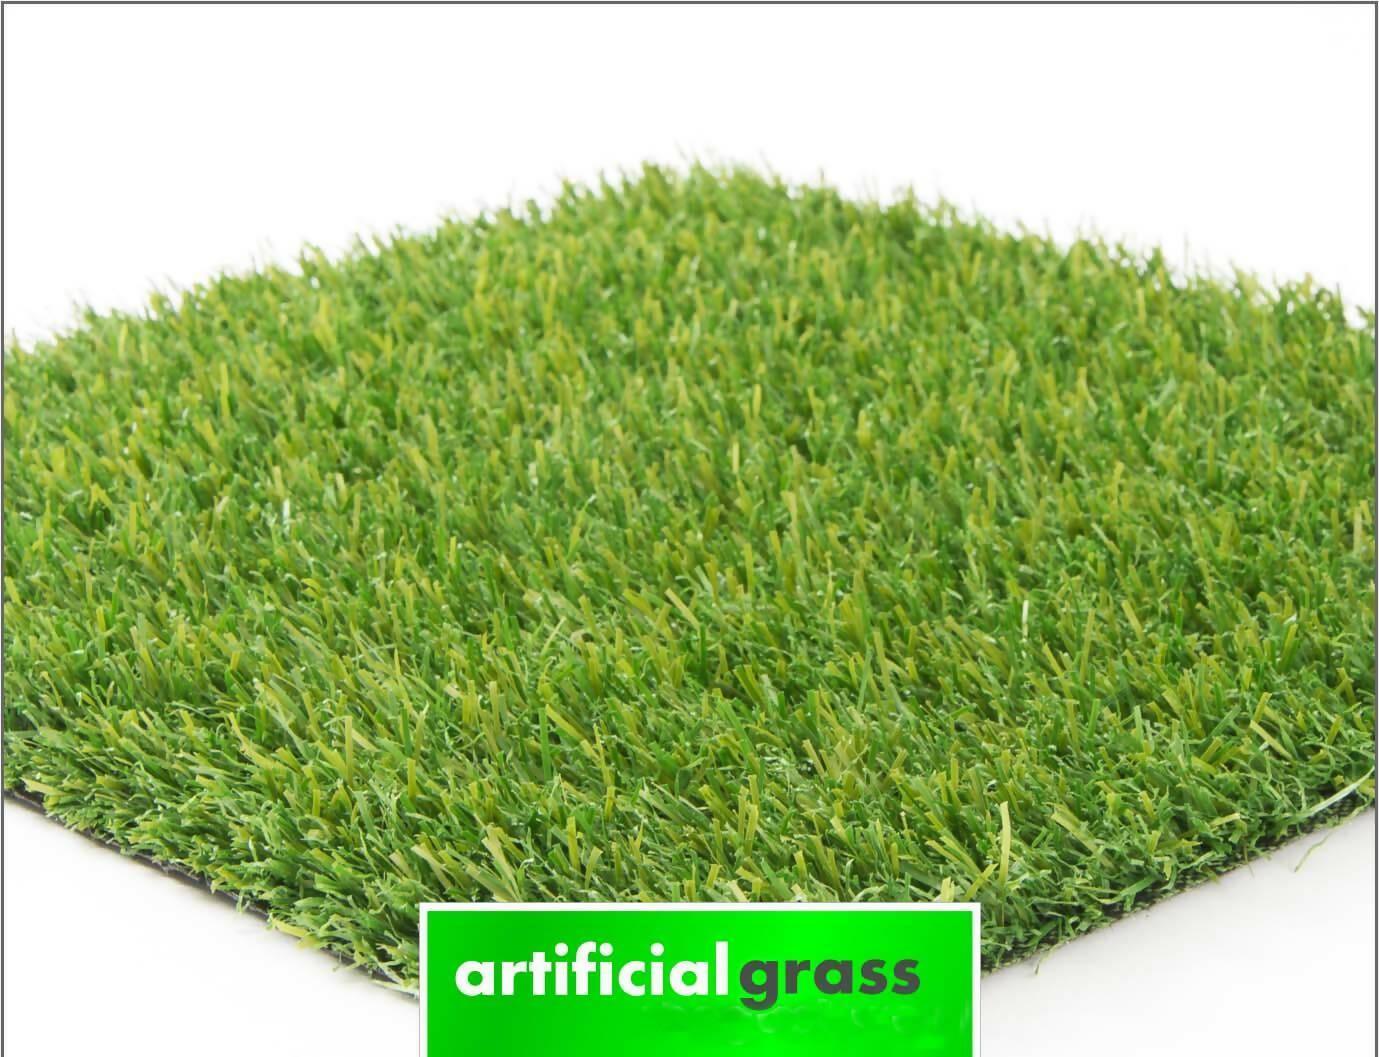 Artificial Grass - Real Feel American Grass -20MM (1FT by 12FT) - ValueBox